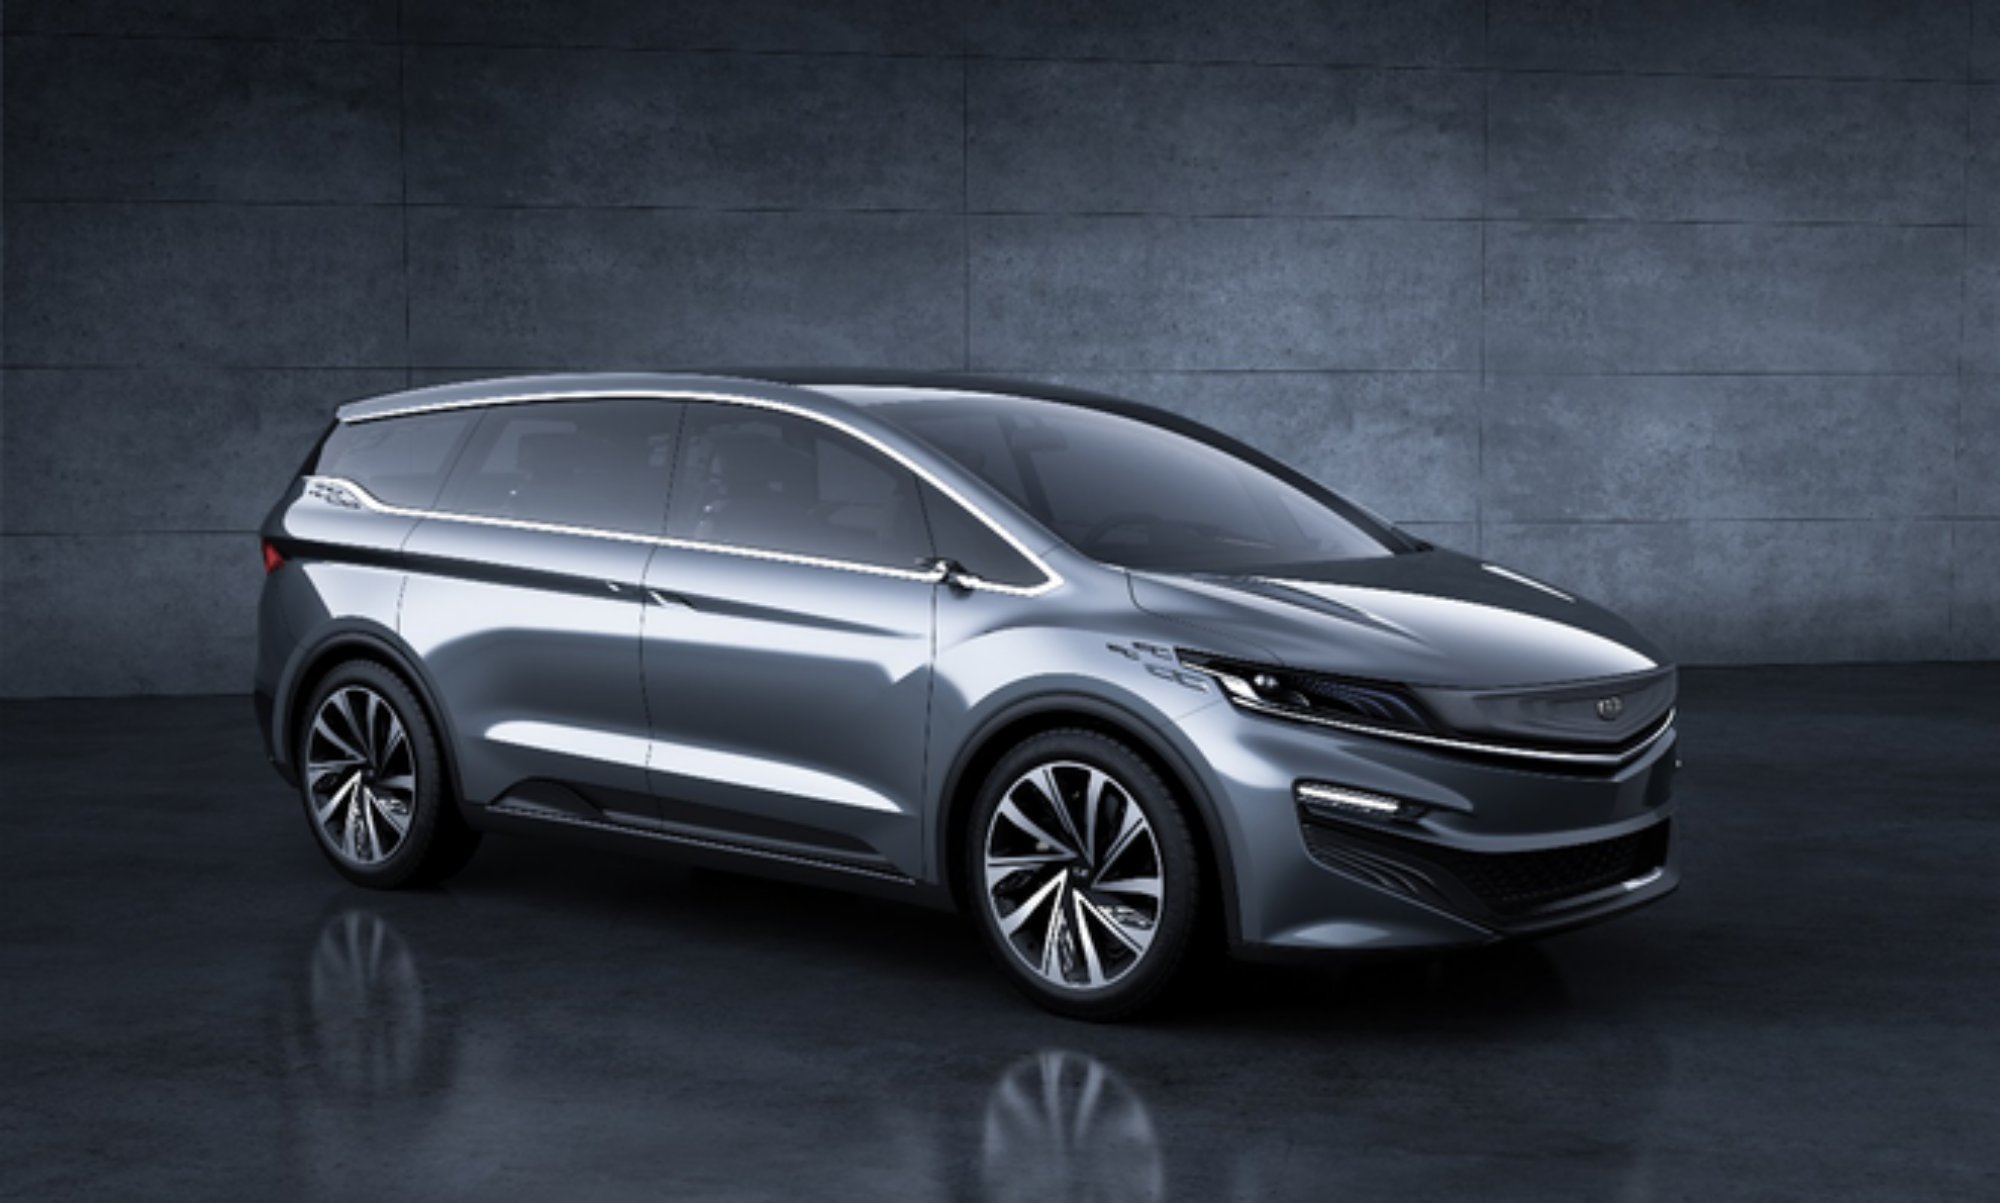 News - Geely MPV Concept Revealed